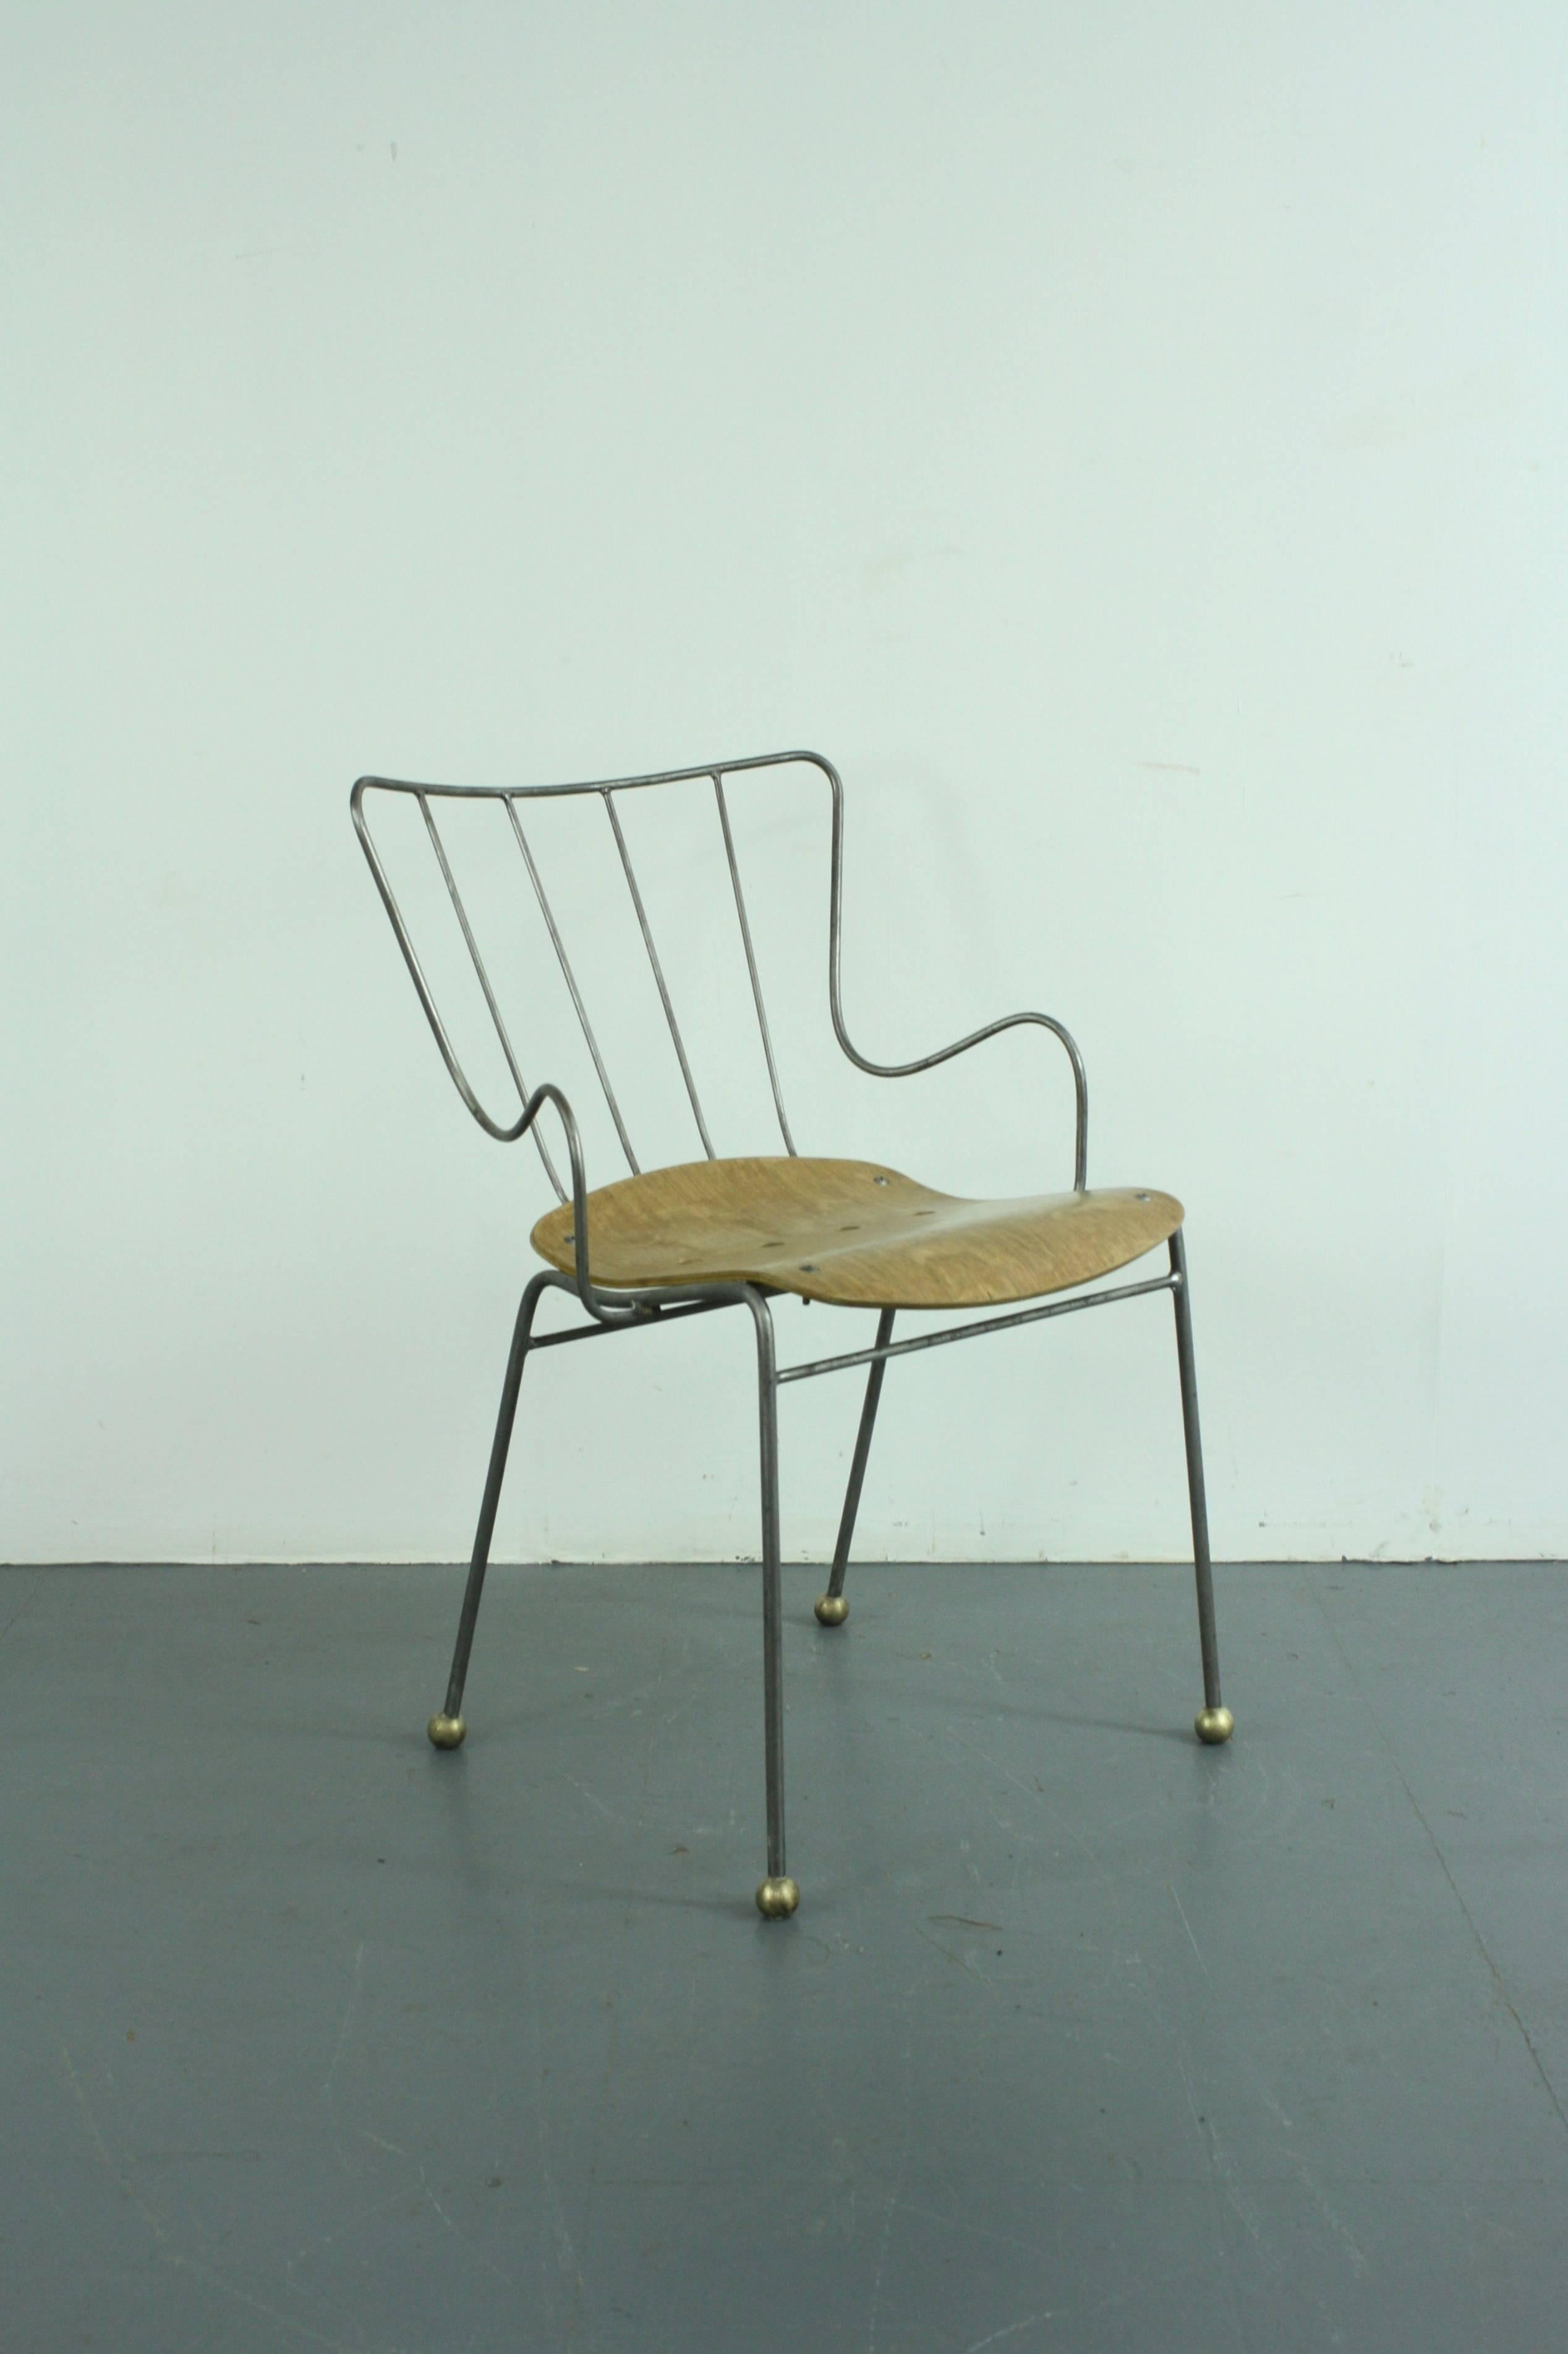 1950s Antelope chair designed by Ernest Race. Bent steel rod frame and moulded plywood seat. 

In good vintage condition. The frame and seat have been stripped and polished.

The Antelope chair was designed for the 1951 Festival of Britain,